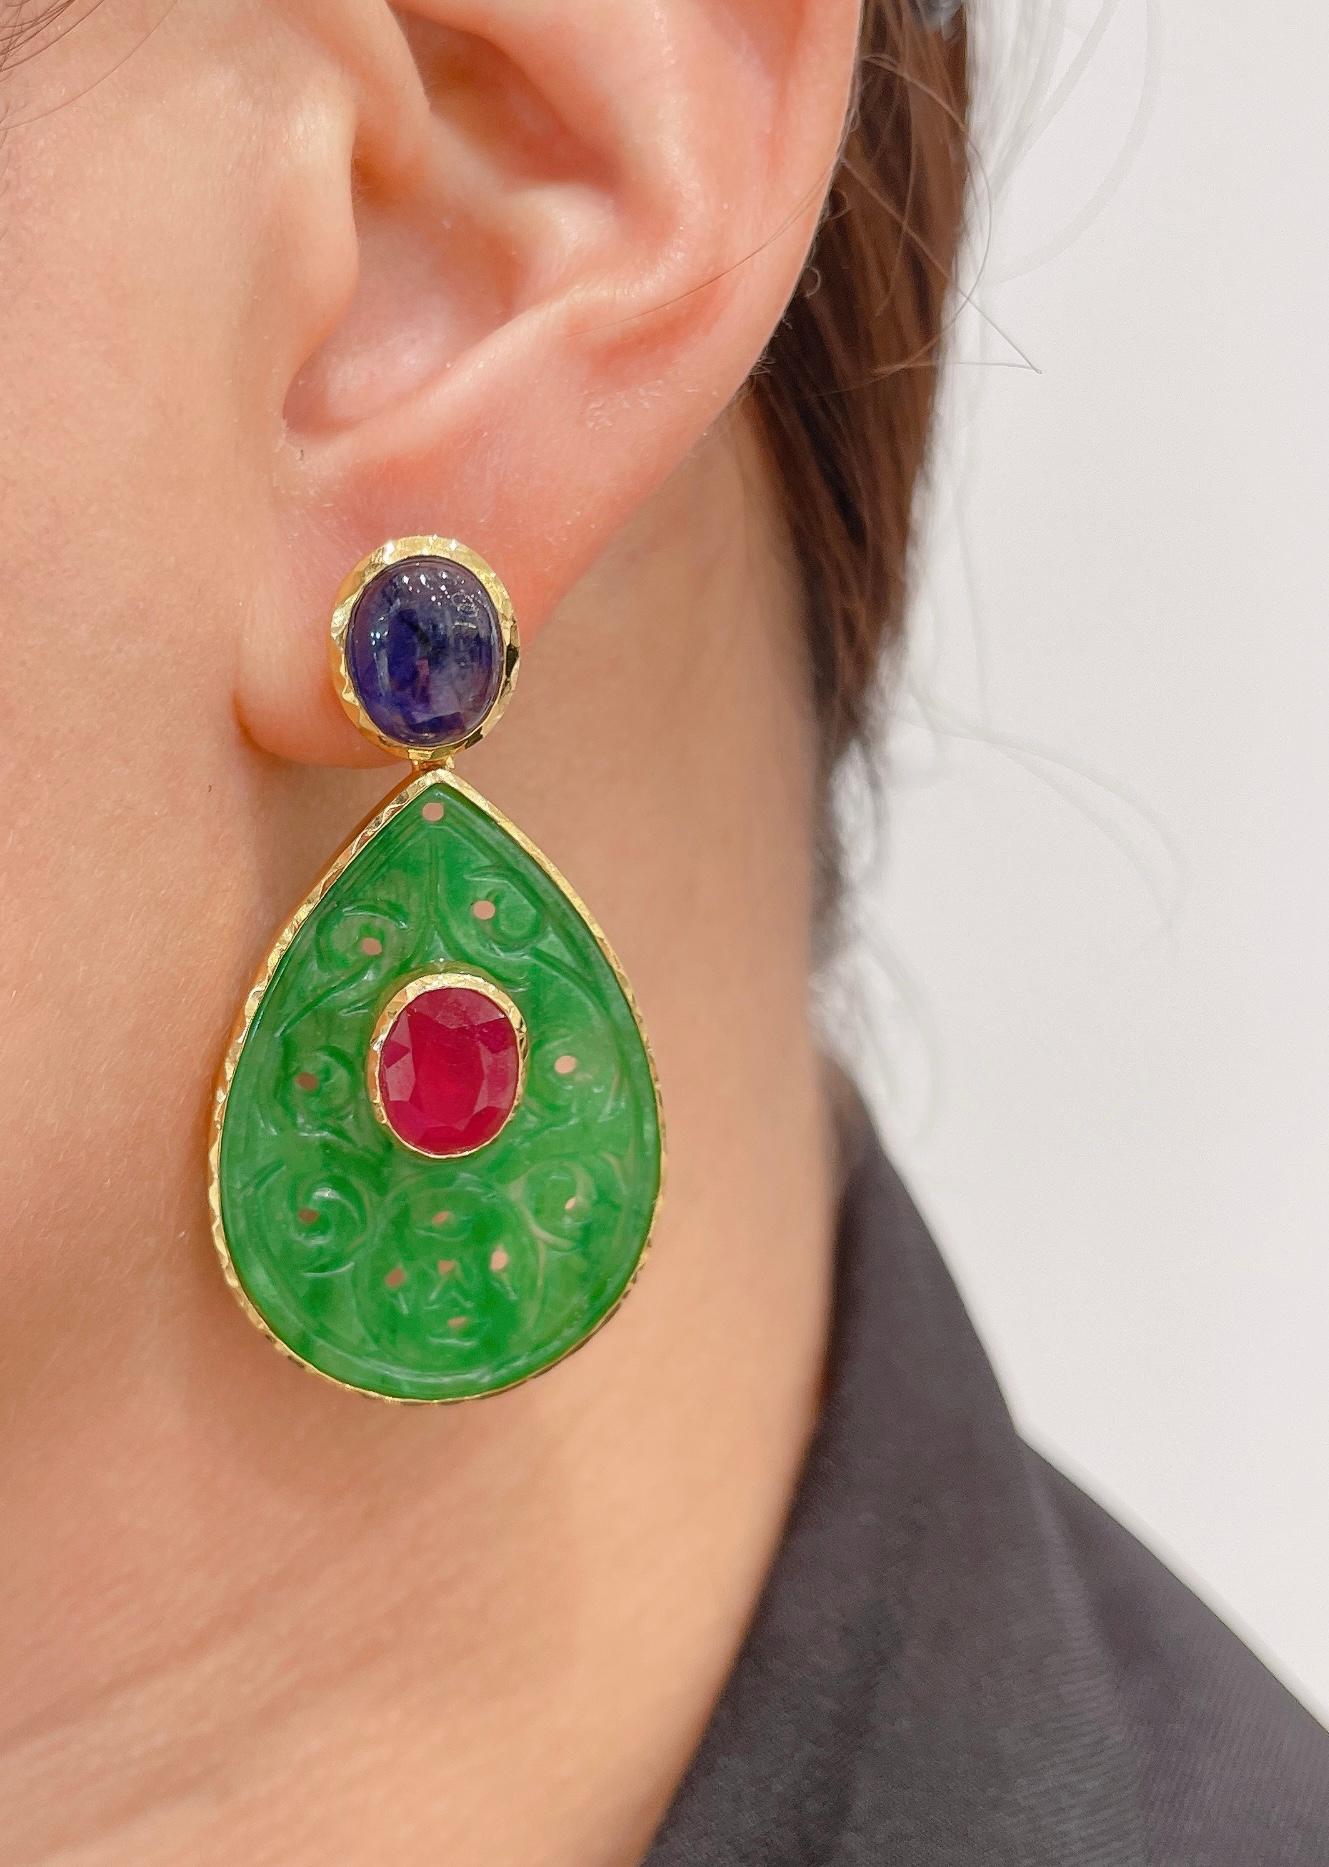 Bochic Beautiful Jade, Sapphire and Ruby Earrings 
Natural Ruby’s 6 Carats / Natural 
Color - Red 
Shape - Ovals 
Set in the Green Jade 
Natural Deep 6 Carats Blue sapphire from Sri Lanka 
Shape - Cabochons
Set on the tops 
22K Gold and Silver 
3